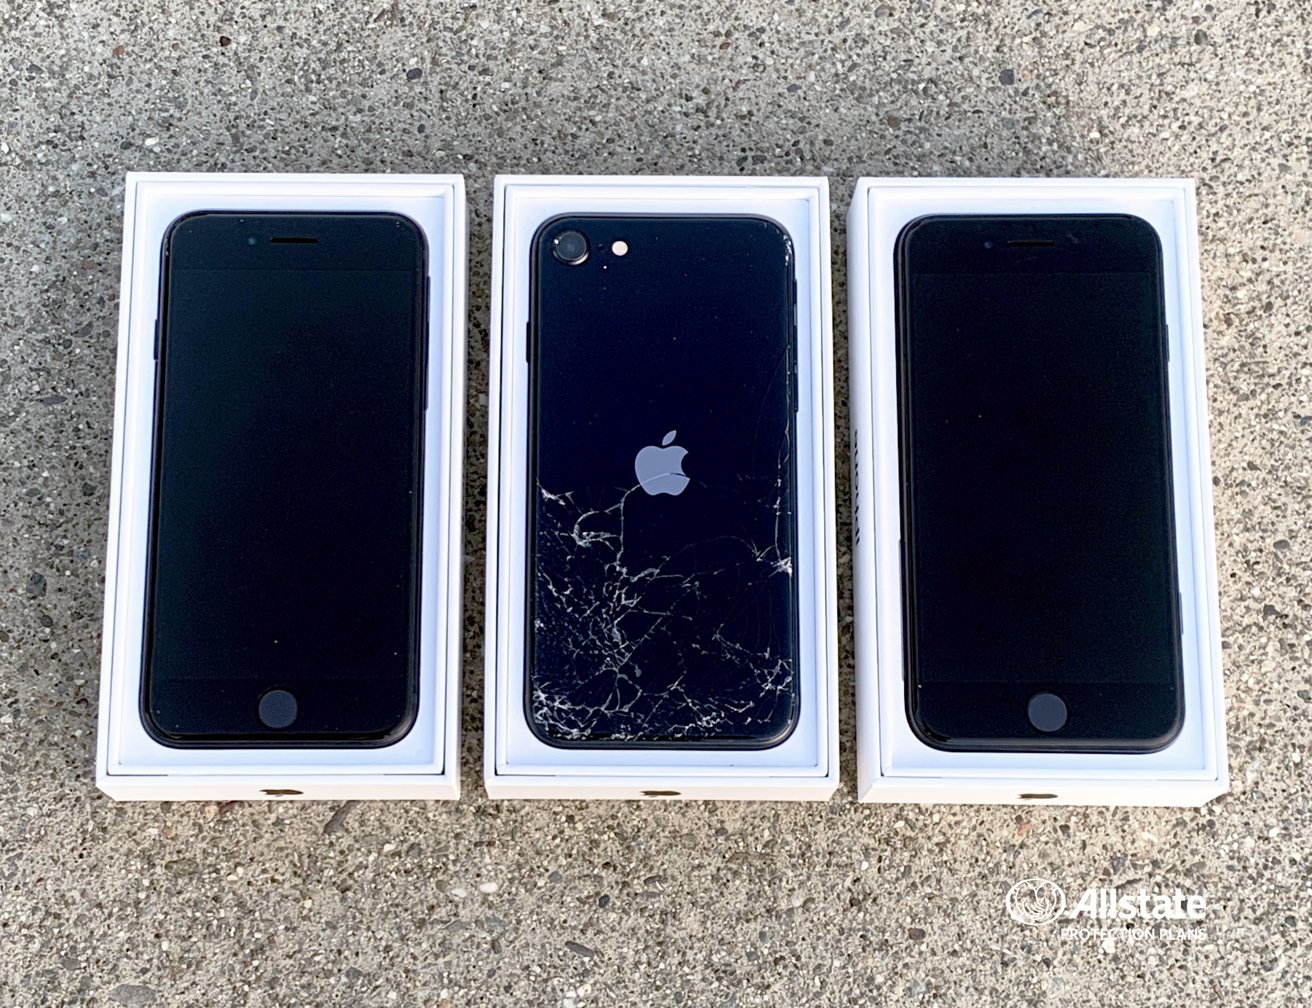 Three iPhone SE units tested by Allstate